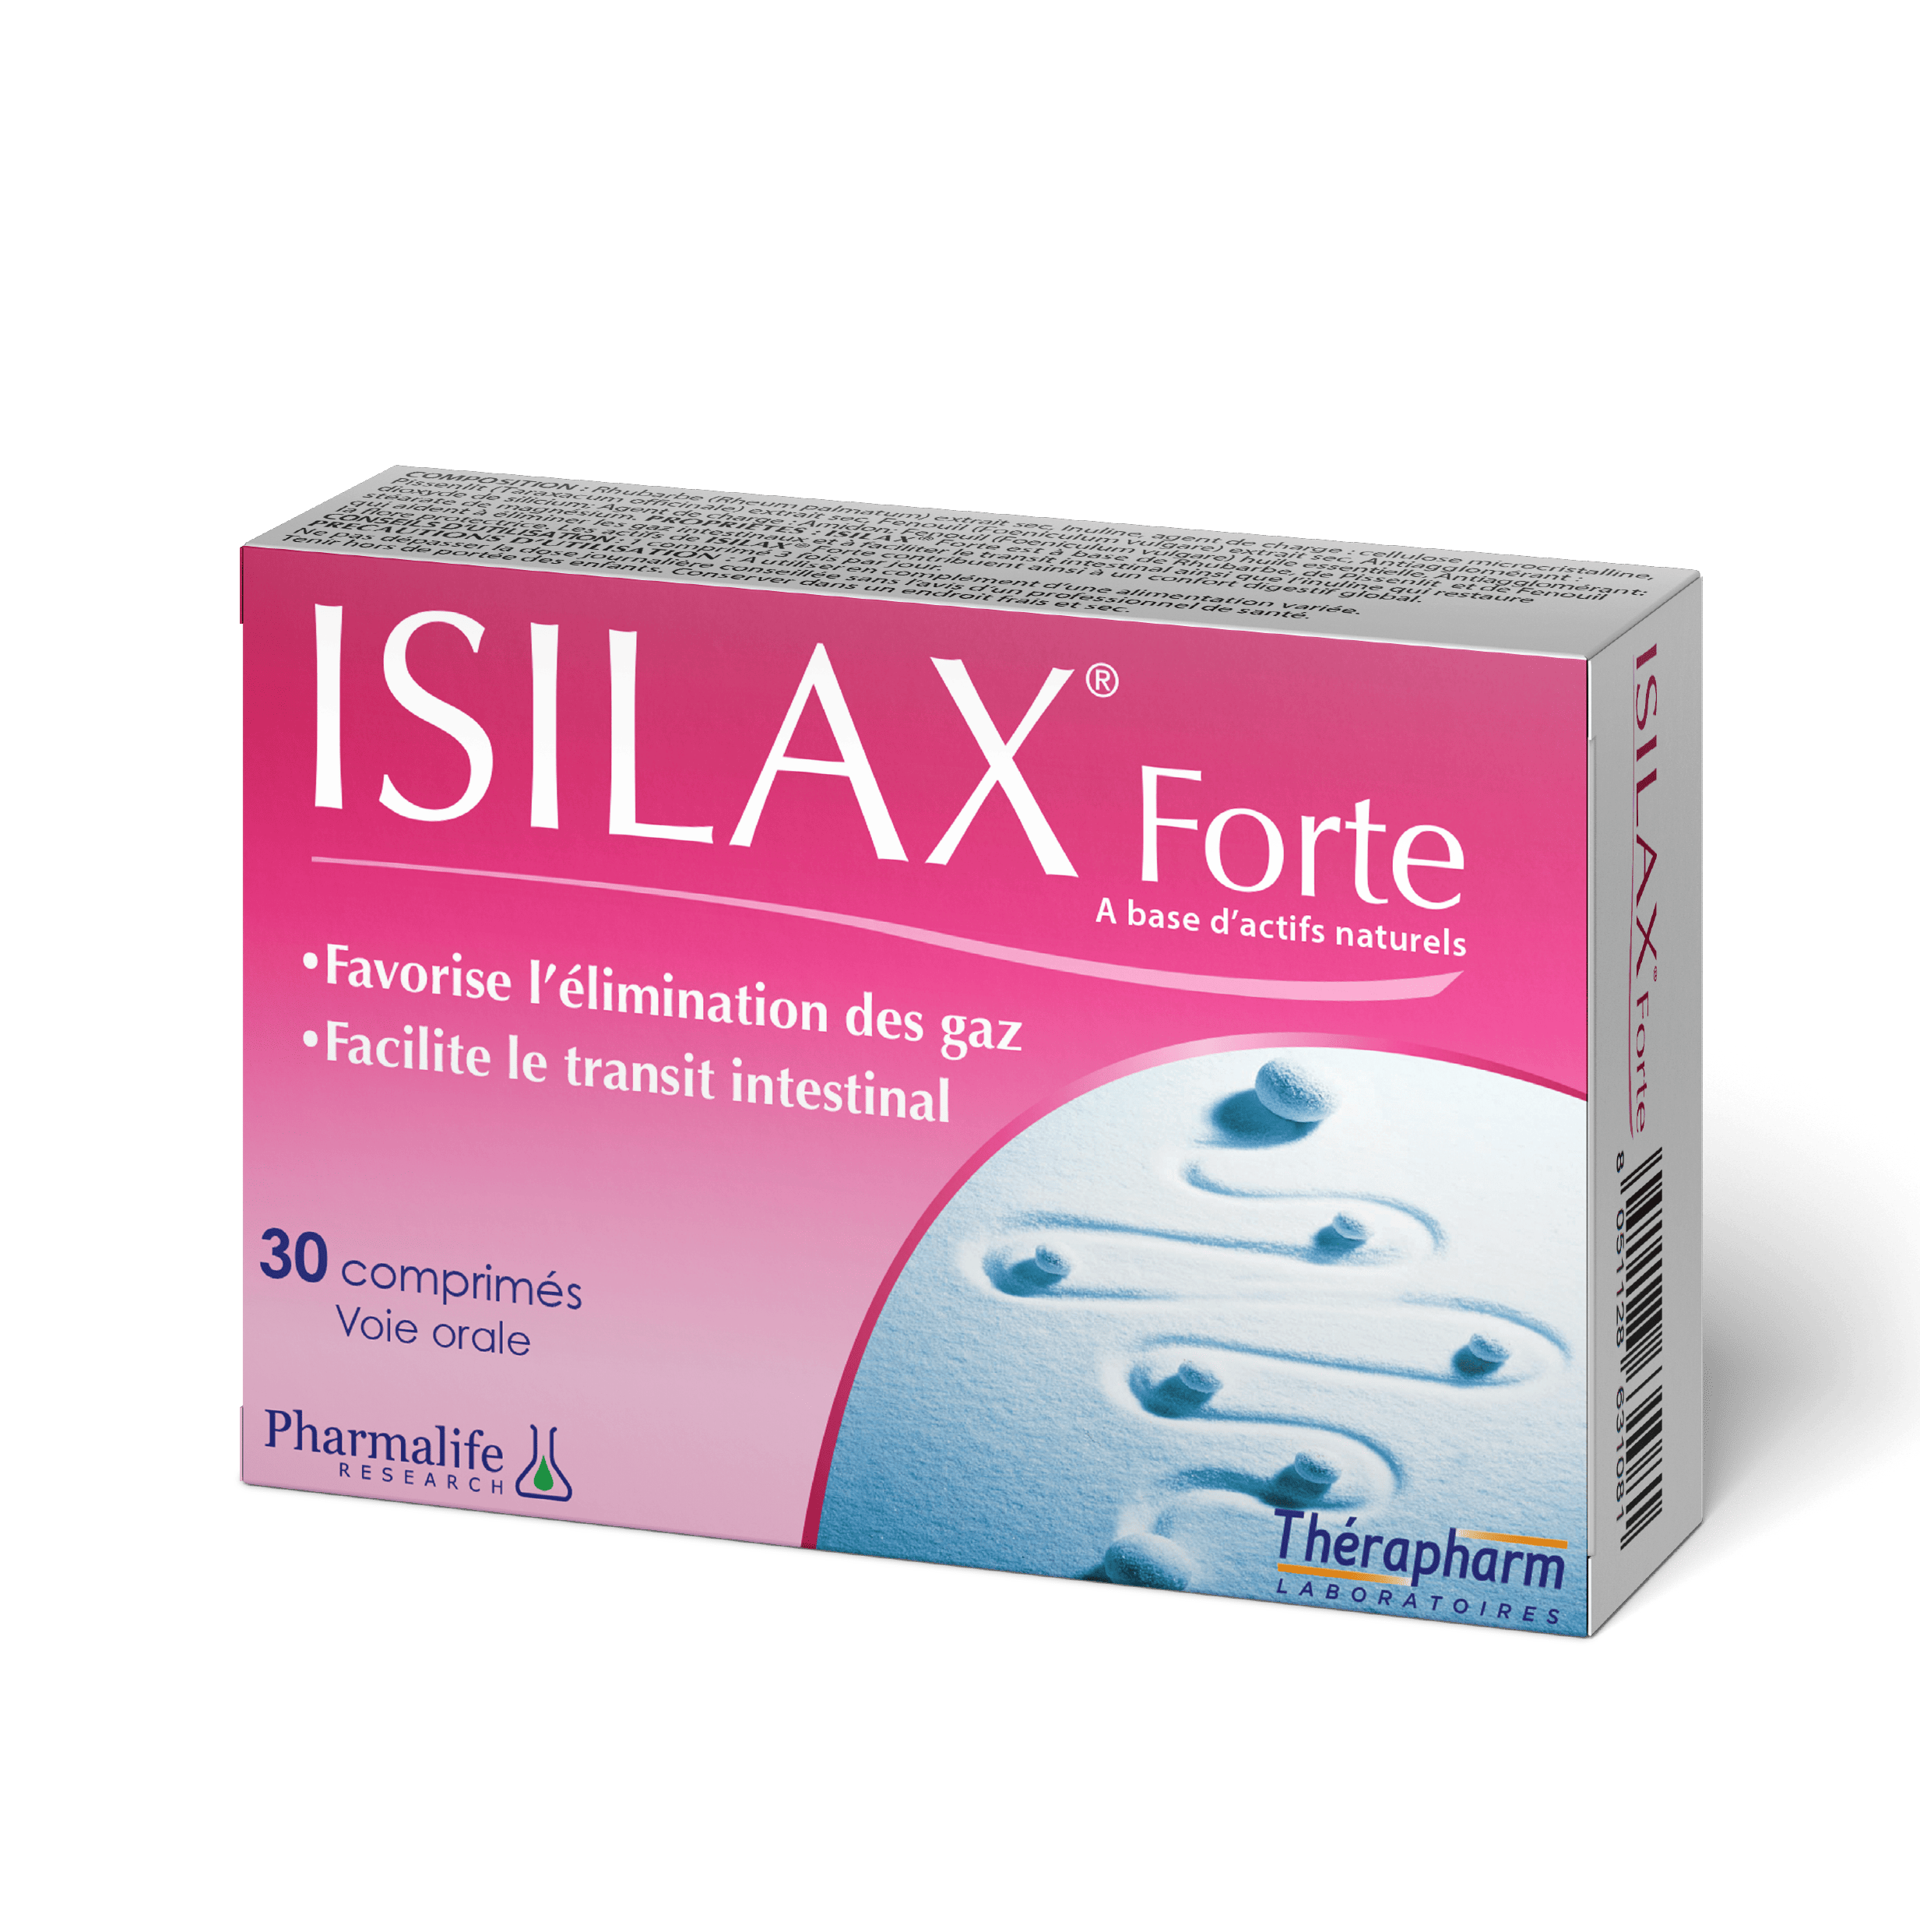 ISILAX ® FORTE